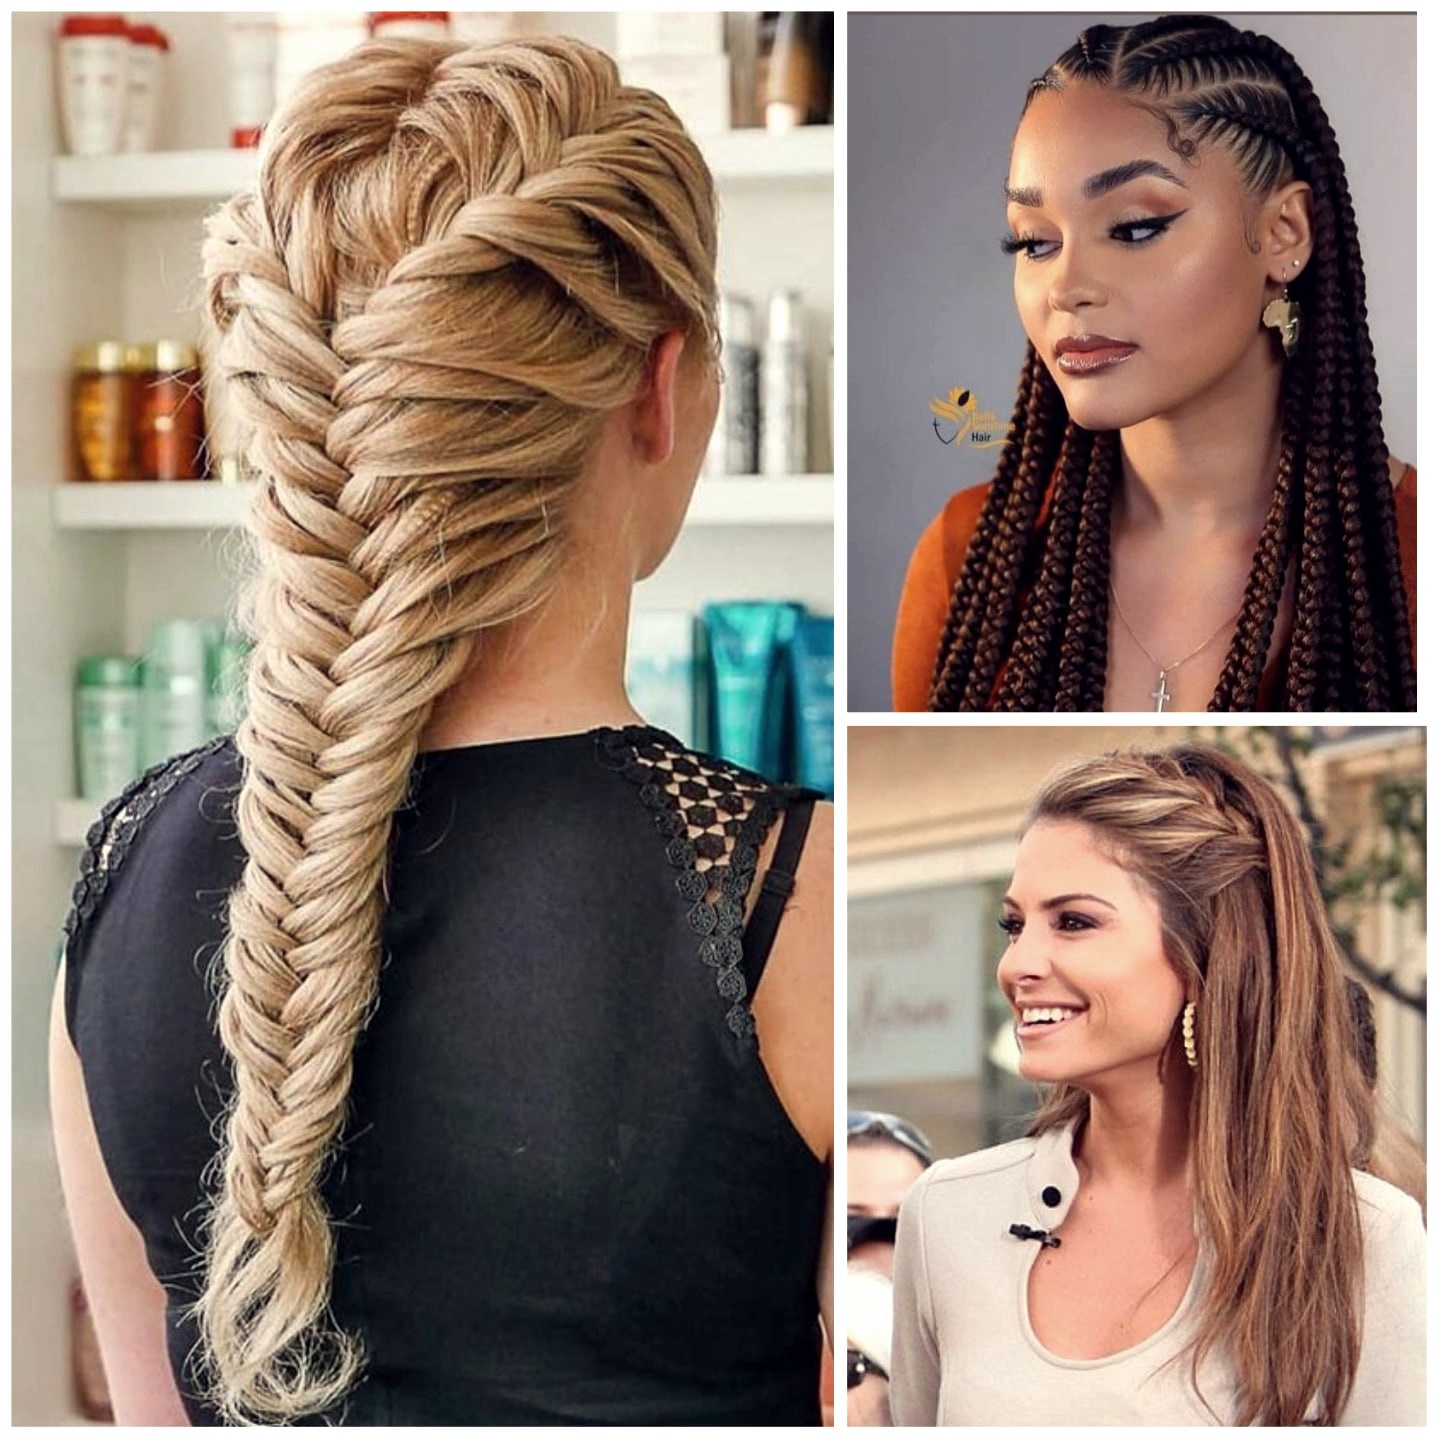 Trendy hairstyles with braids for women 2023